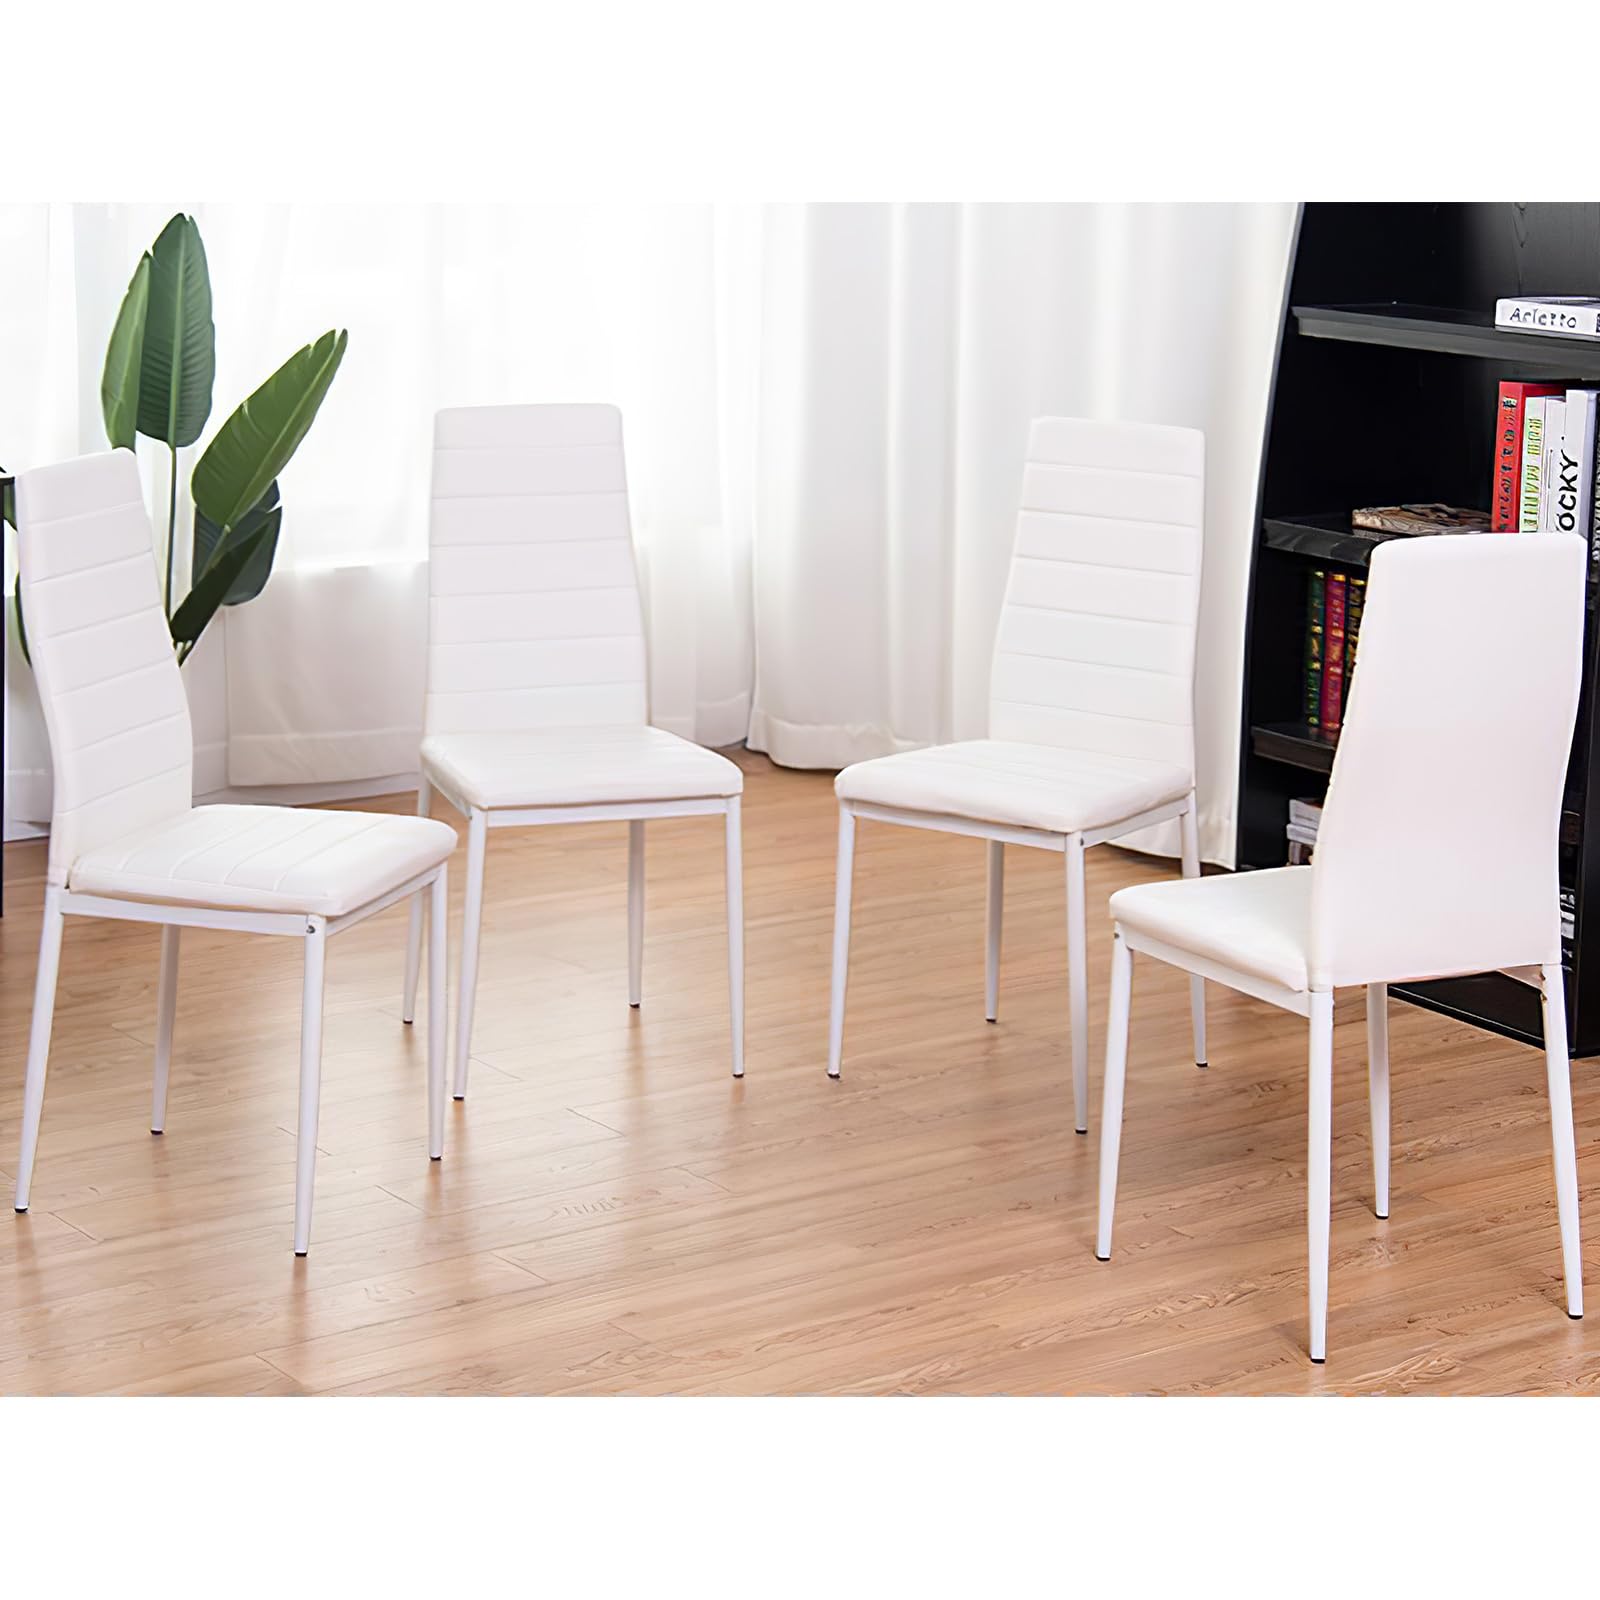 Giantex Set of 4 Dining Chairs